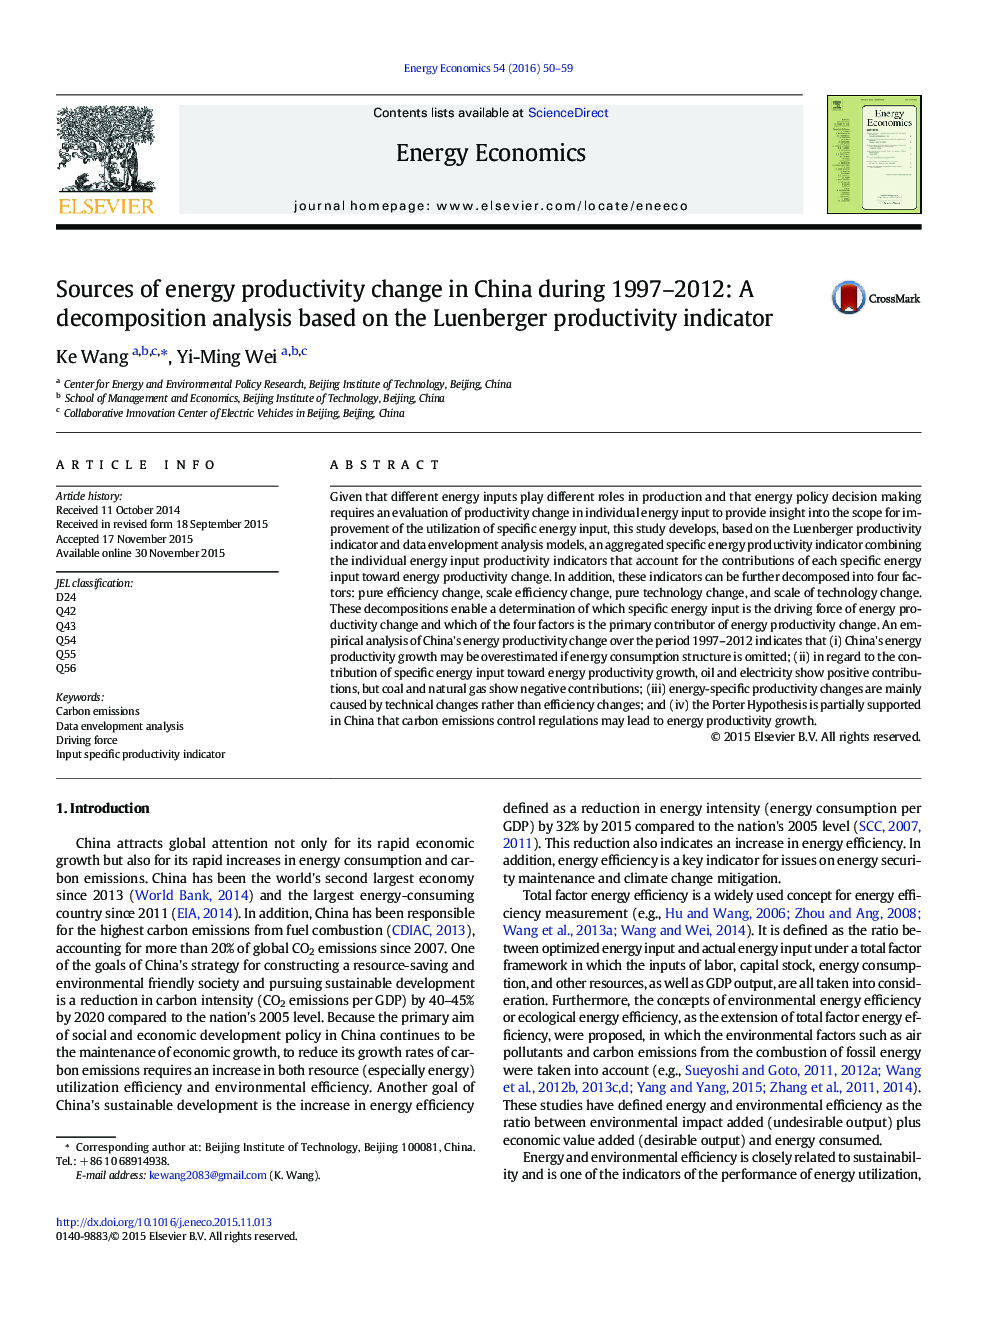 Sources of energy productivity change in China during 1997-2012: A decomposition analysis based on the Luenberger productivity indicator